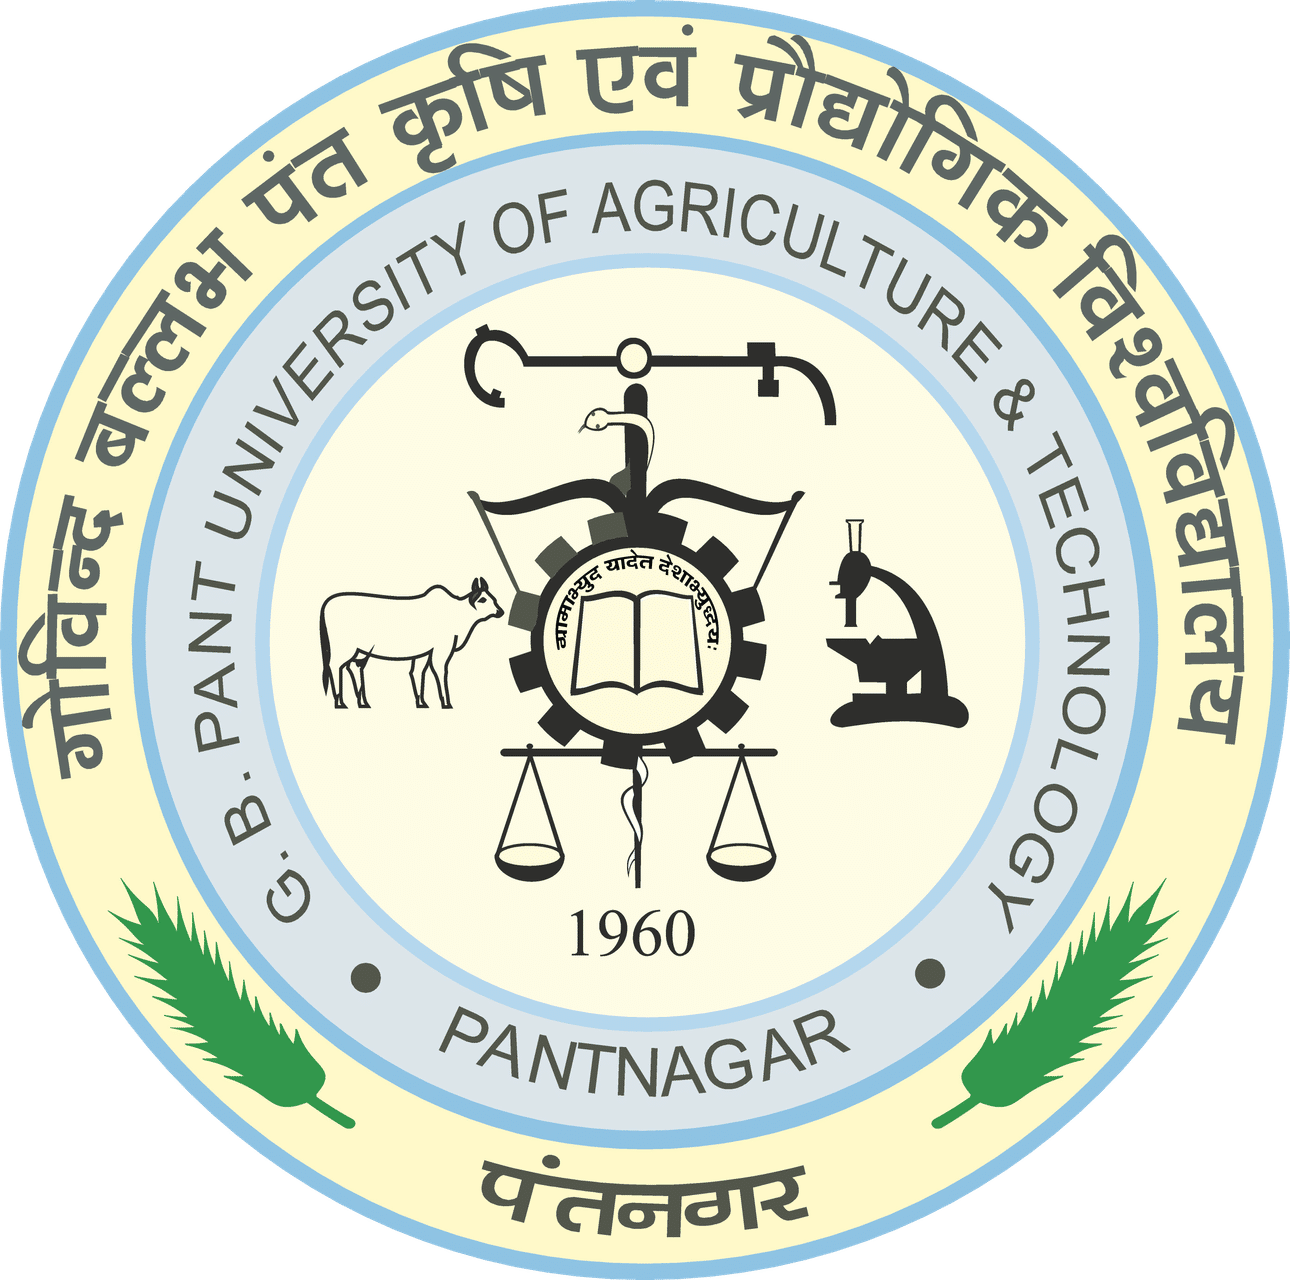 GB Pant University of Agriculture & Technology